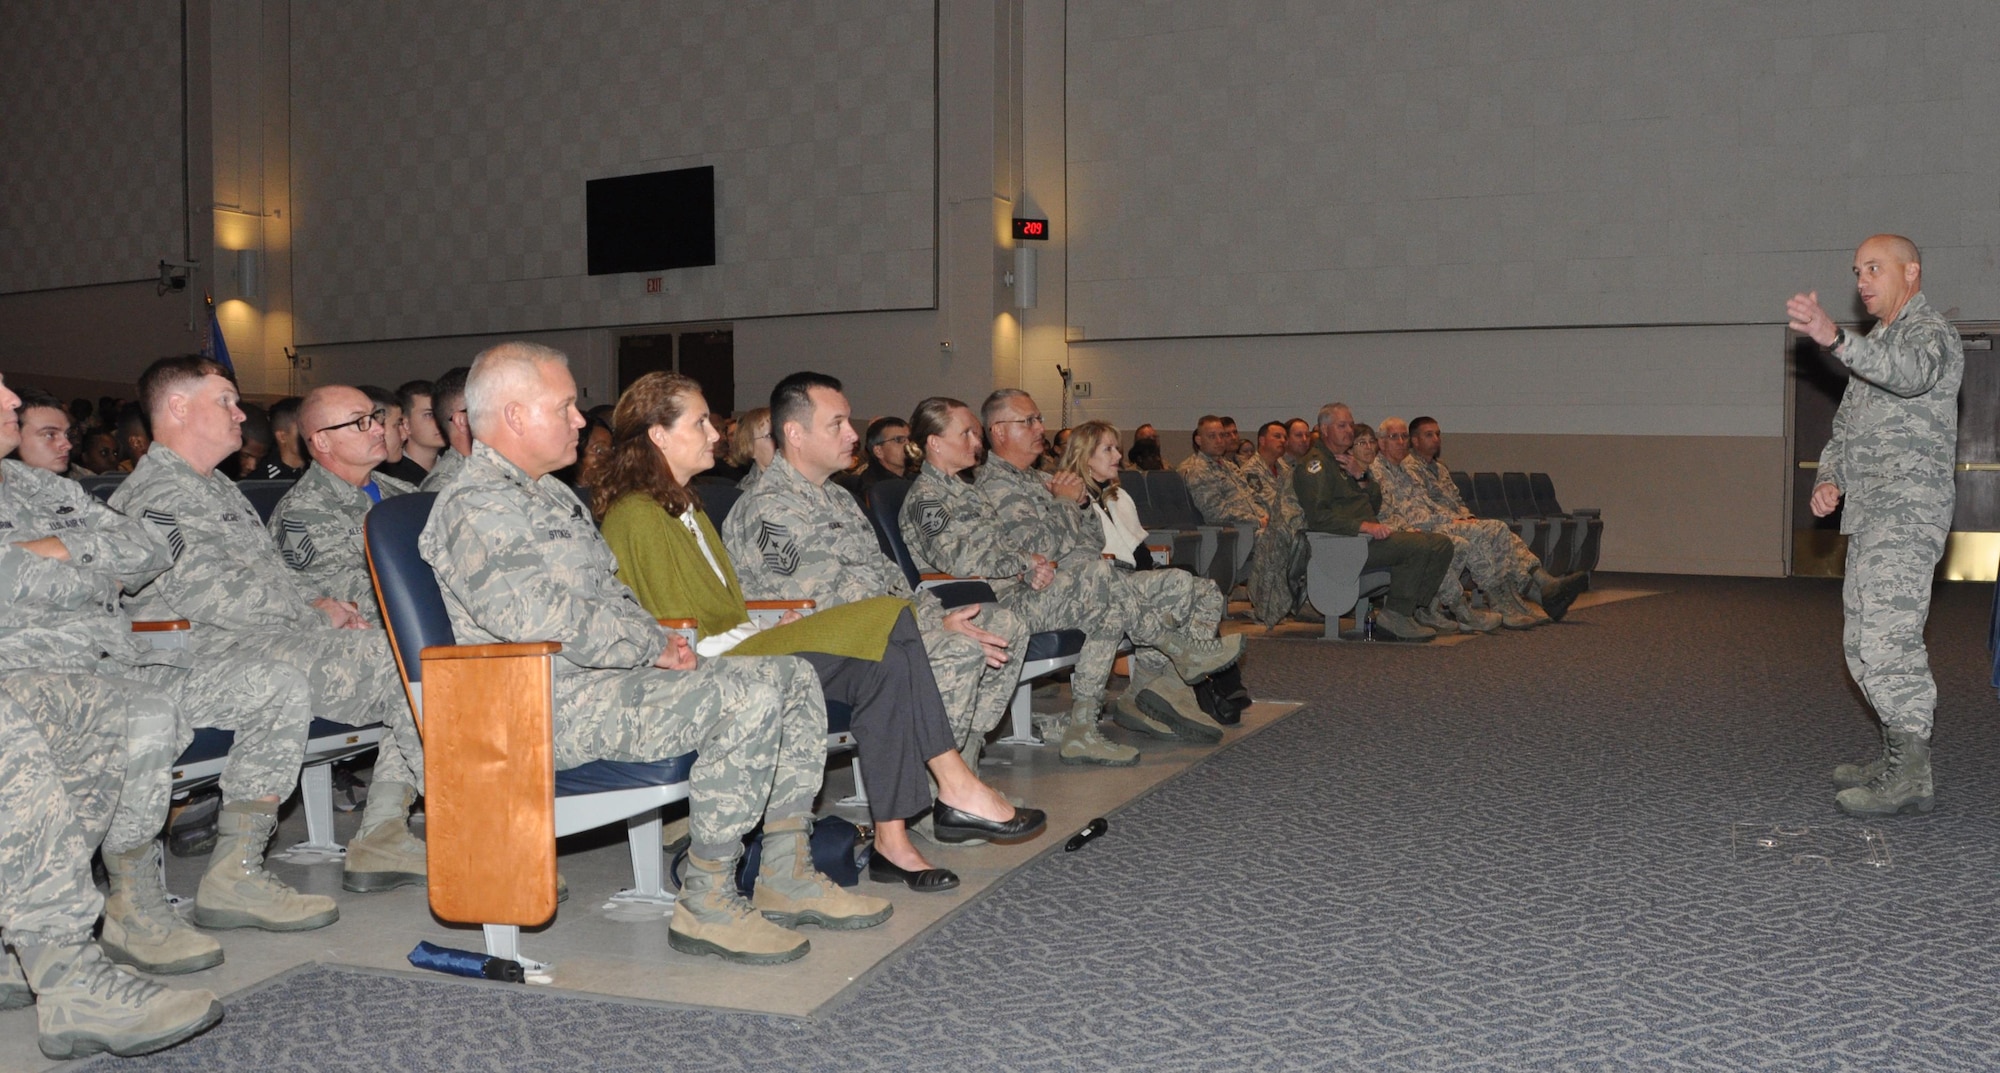 Commanding General of the 22nd Air Force, Maj. Gen. John Stokes listens to Col. David Condit, Commander of the 908th Airlift Wing address the members of the wing during a Commander's Call at Polifka Auditorium Dec. 3. Stokes used to be a member of the 908th and came back to visit with the unit before the winter holidays. (U.S. Air Force photo by Bradley J. Clark)